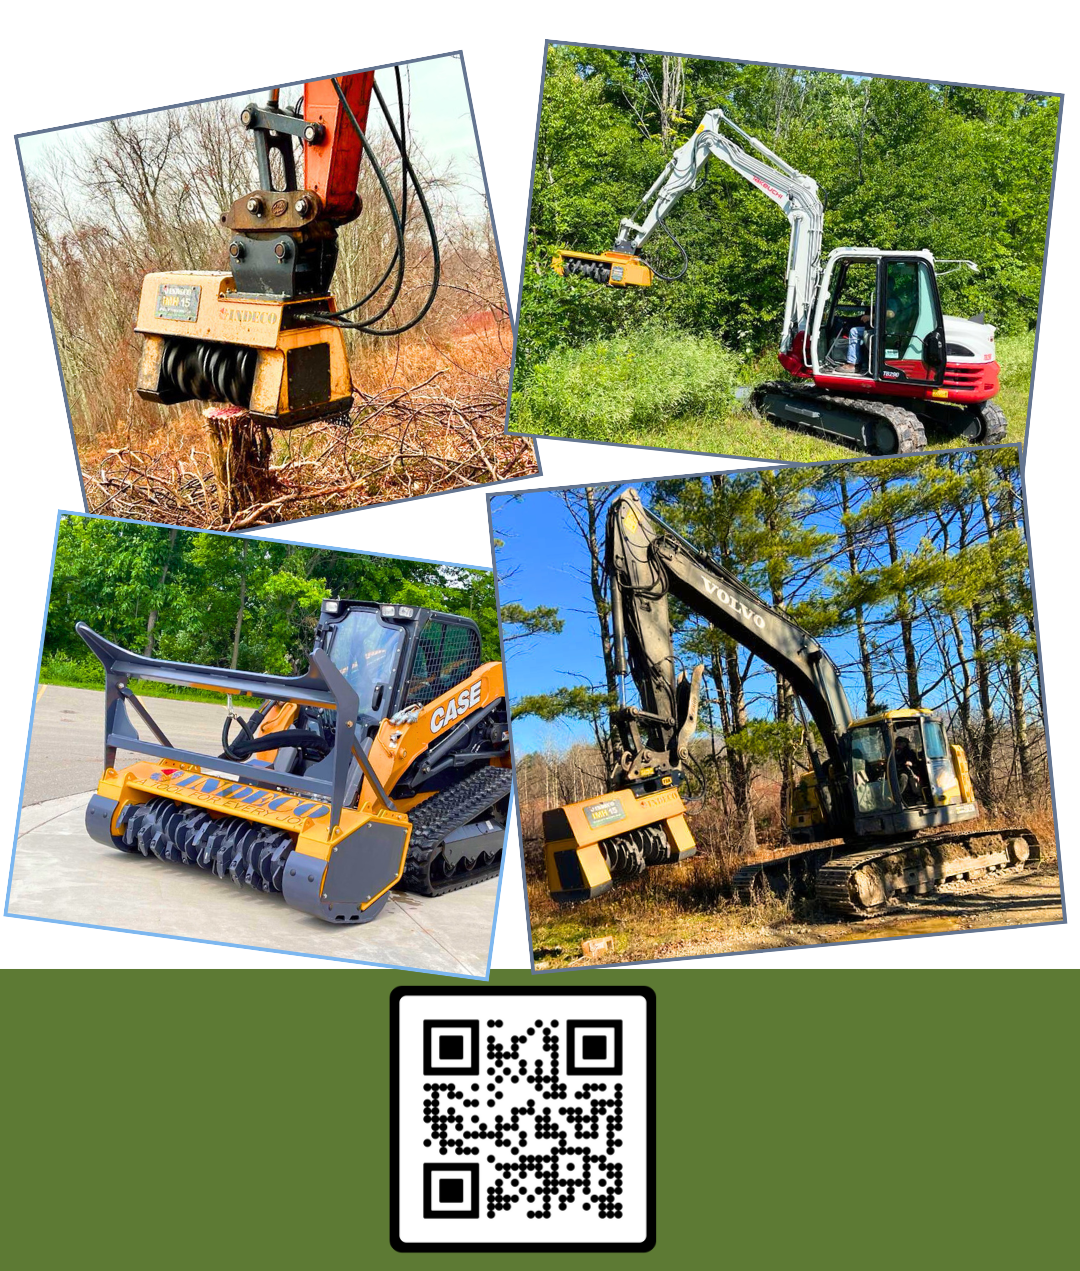 advanced forestry equipment - forestry industry tools - forestry attachments